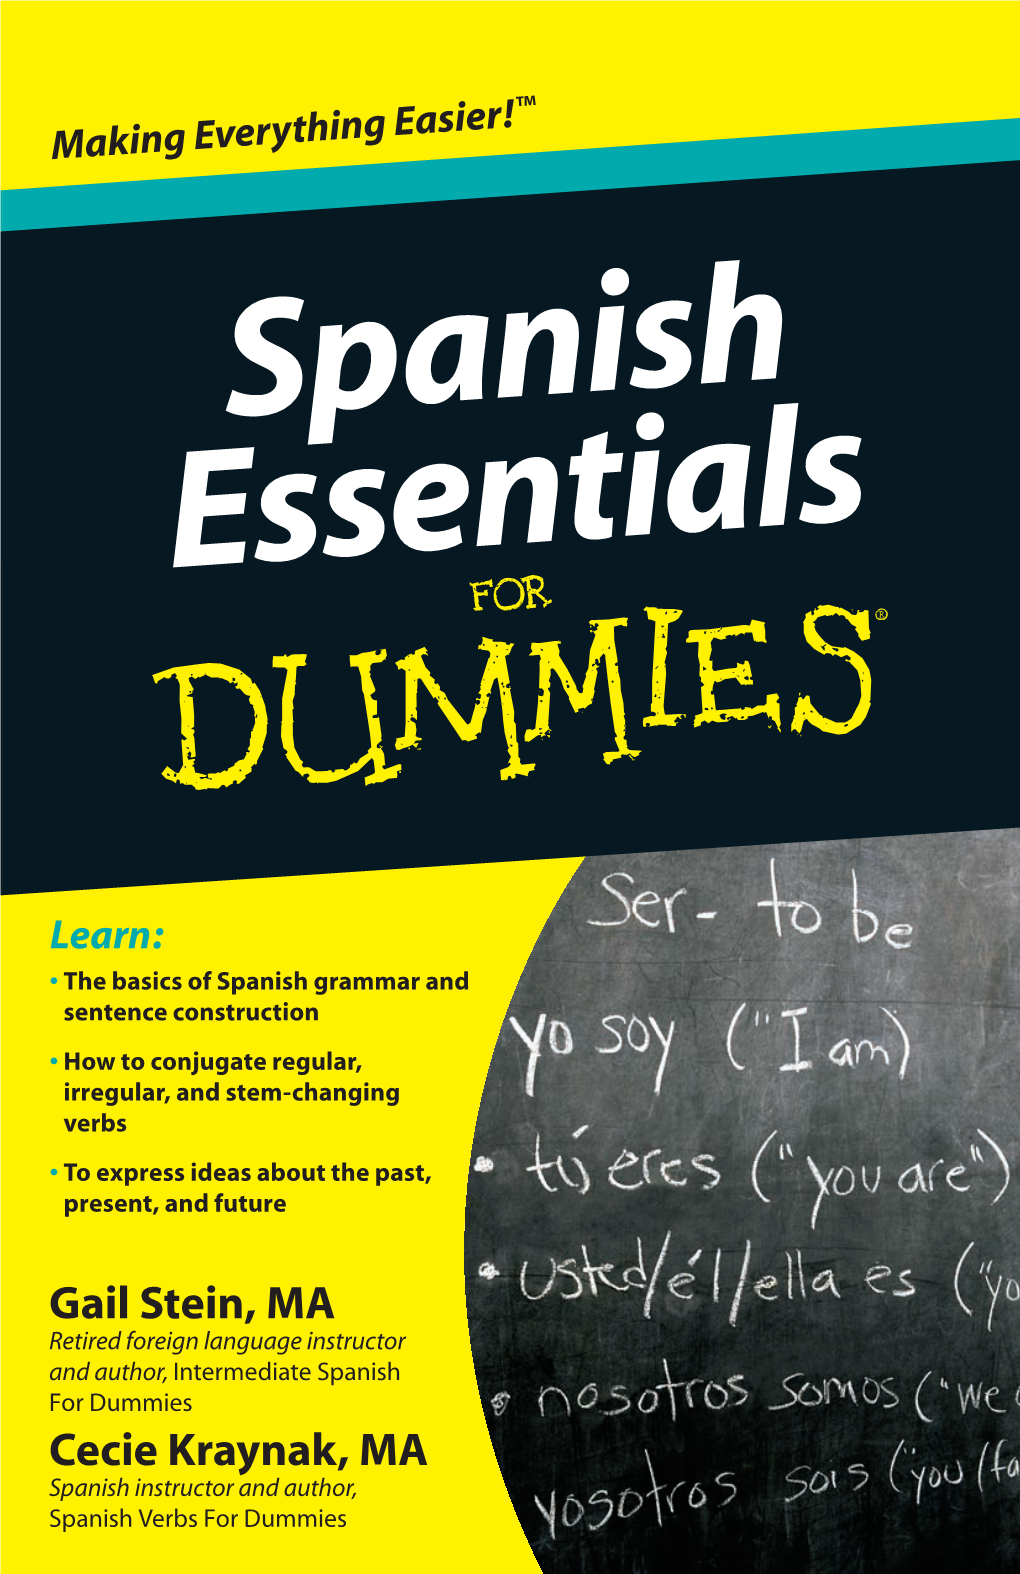 Spanish Essentials for Dummies • How to Use “De” to Show Contains What You Need to Communicate Effectively